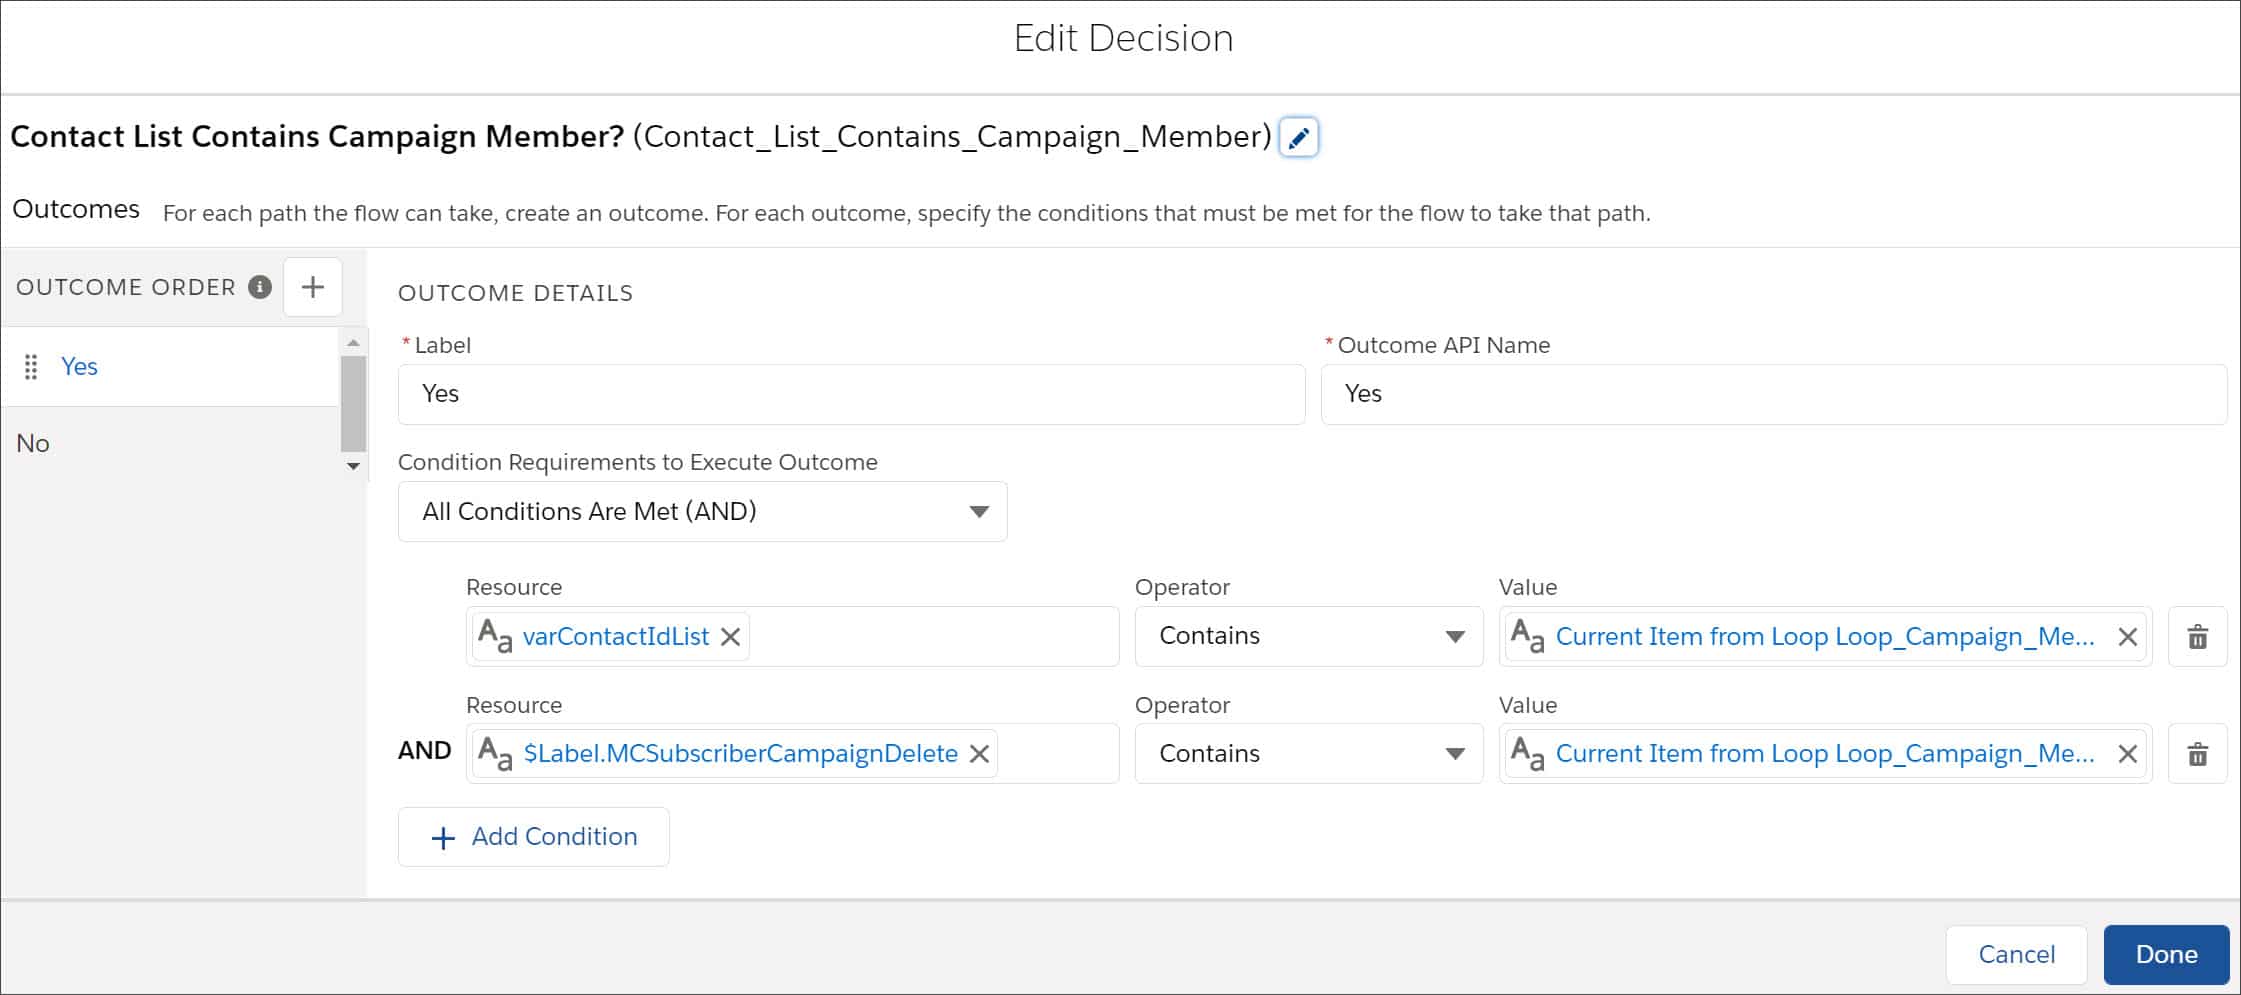 Decision Contact List Contains Campaign Member